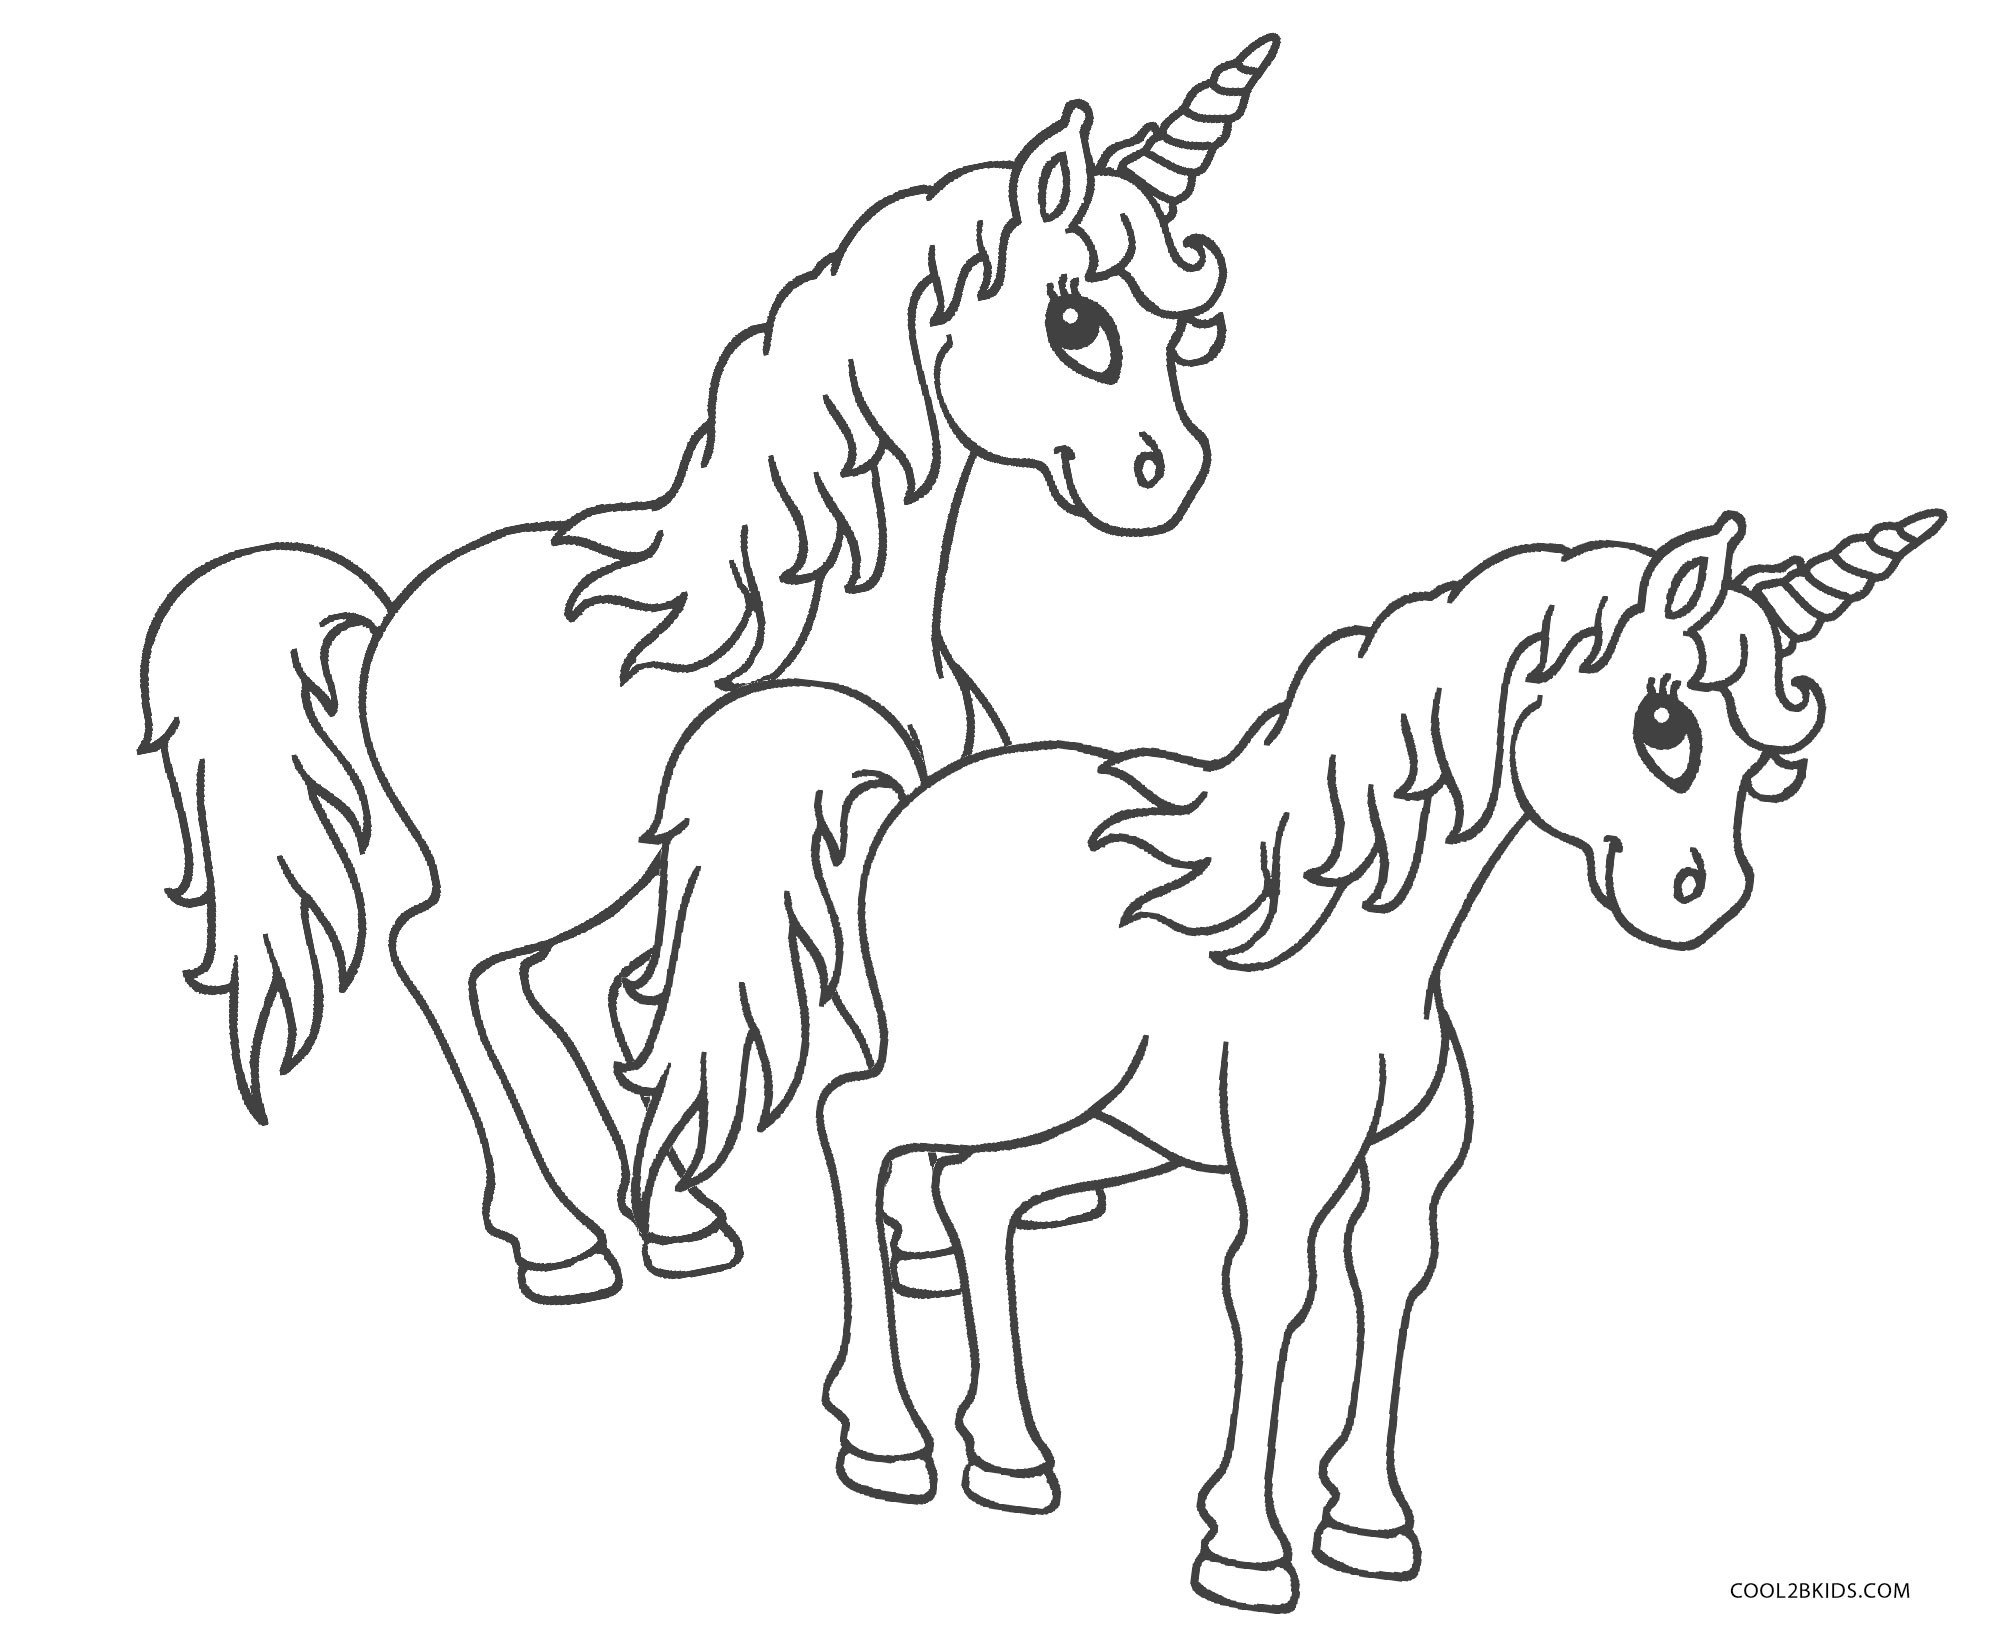 Unicorn Coloring Sheets For Kids
 Unicorn Coloring Pages